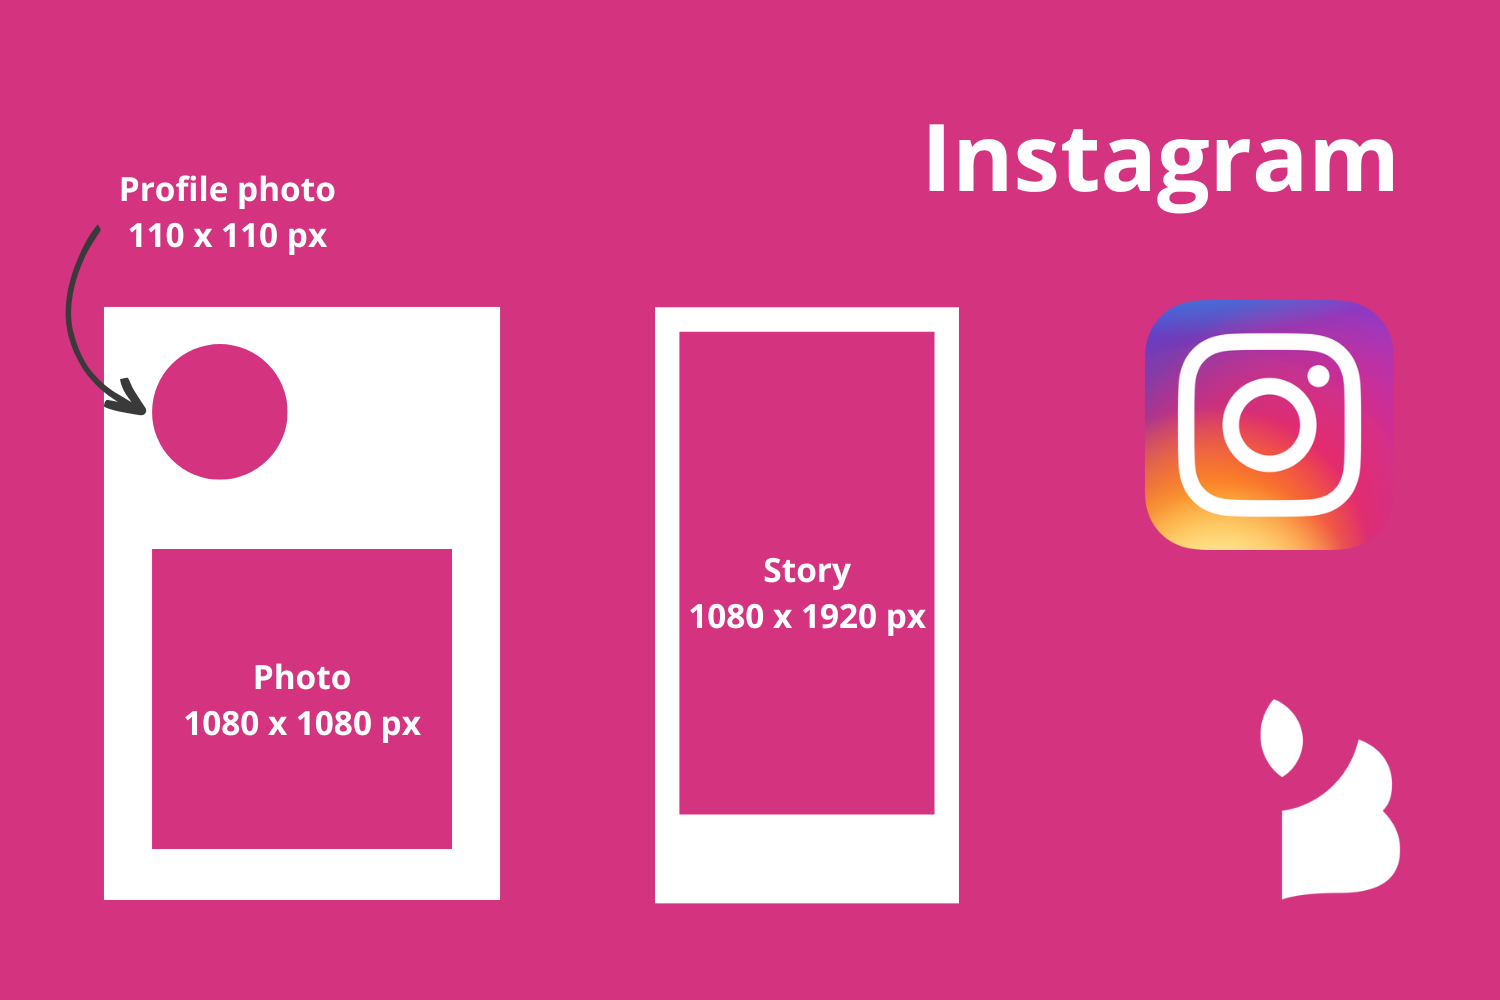 Maximising your reach: the insiders guide to social media image sizes ...